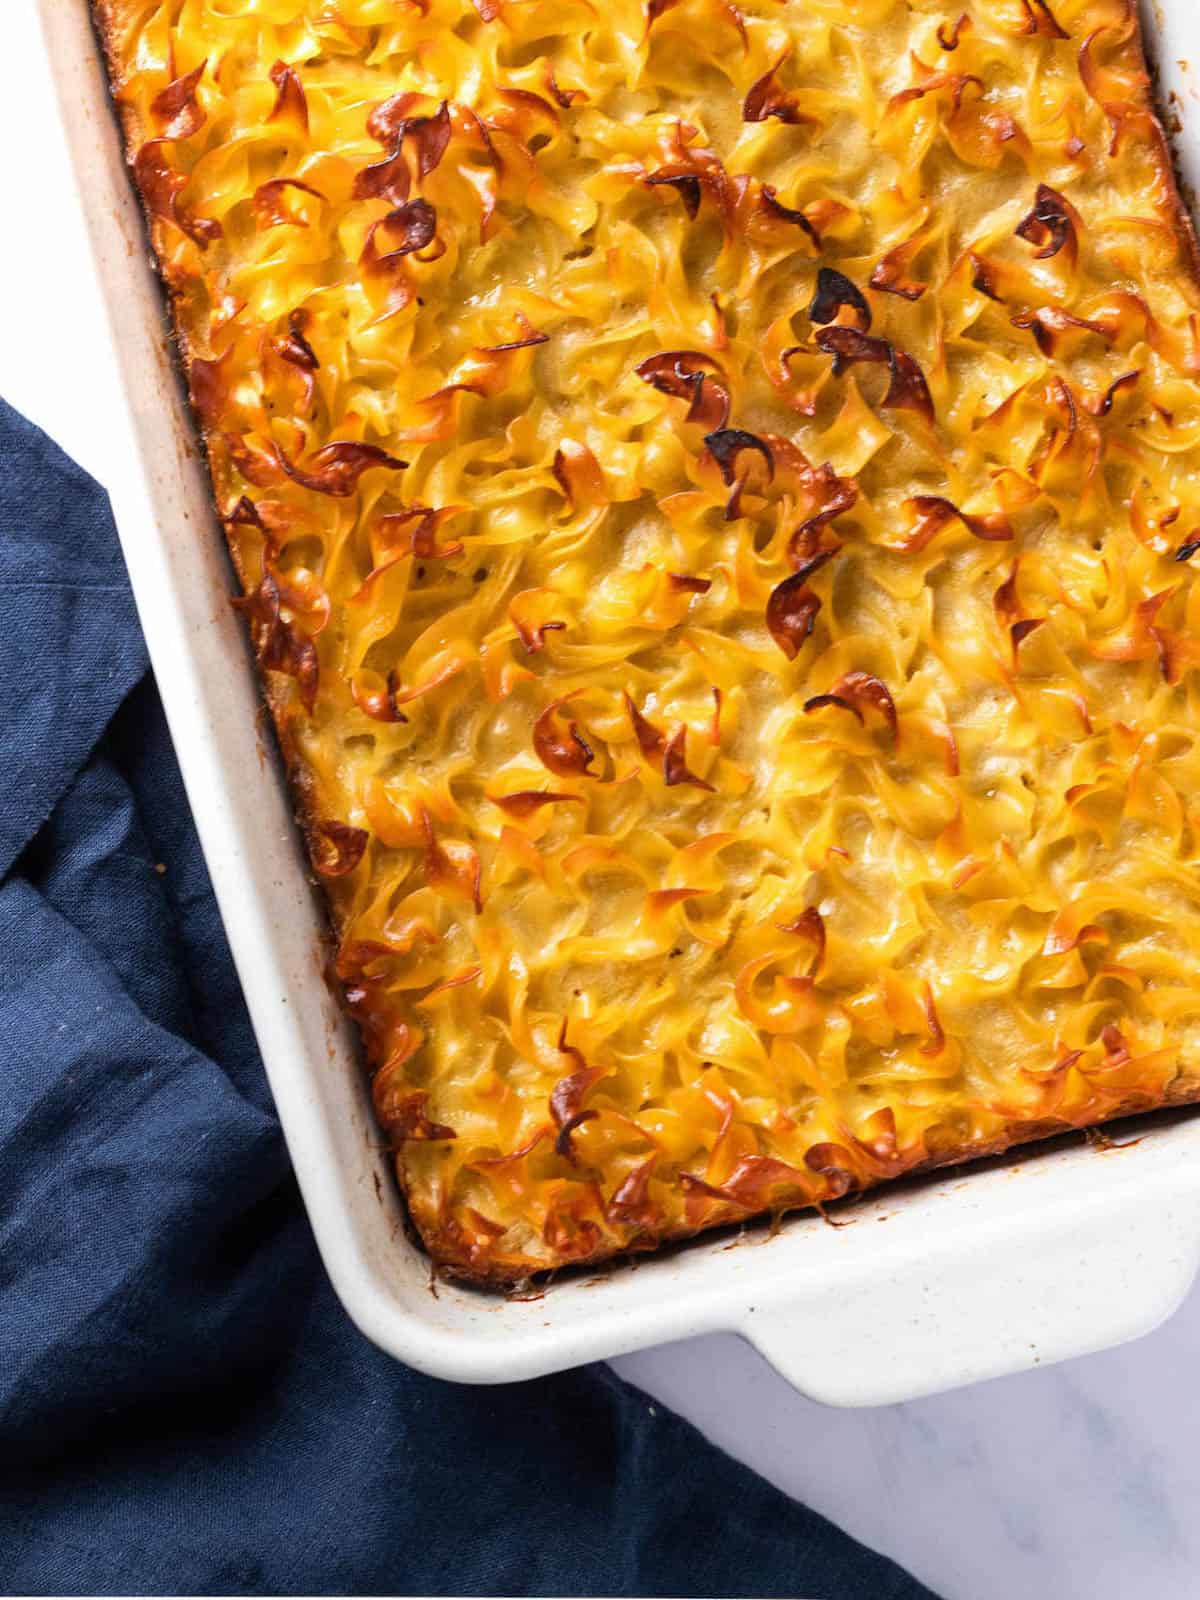 The noodle kugel is finished baking and has a crispy top.